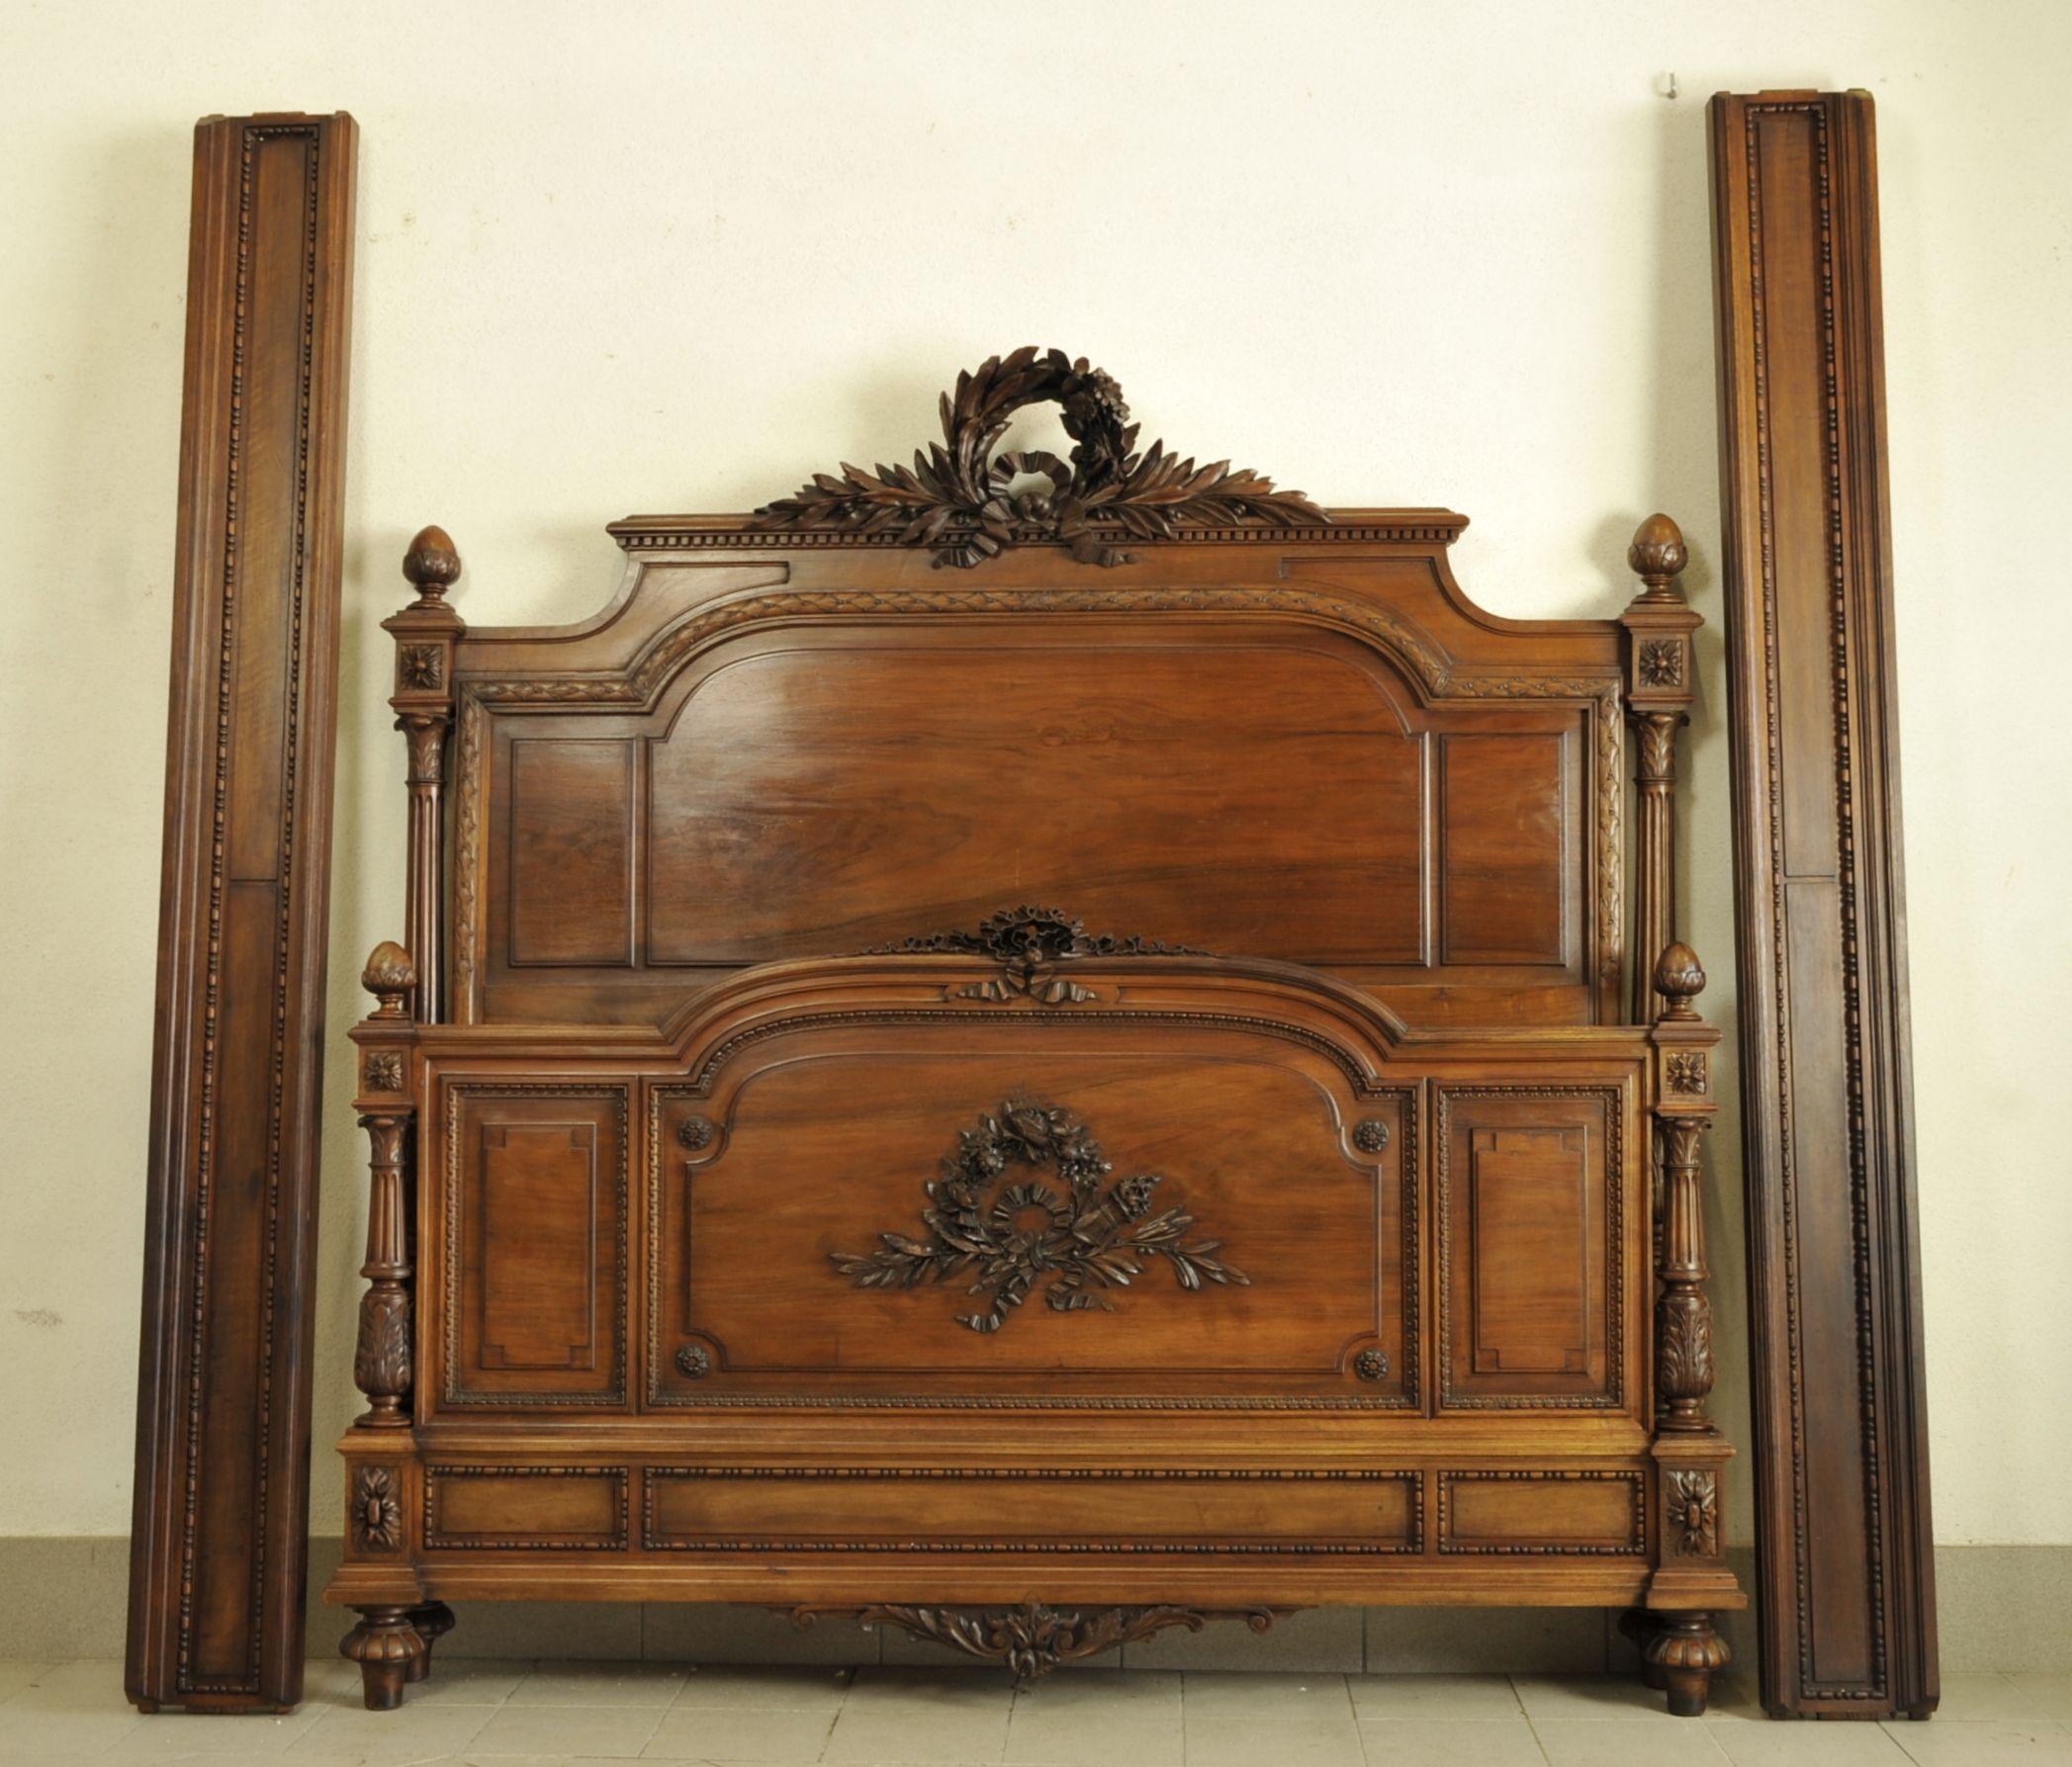 Louis XVI bedroom furniture in solid walnut very richly carved with beaded and gadrooned friezes, mistletoe crowns adorned with flowers and ribbons, and other neoclassical-inspired ornaments.

Composed of a large bed and a large wardrobe with